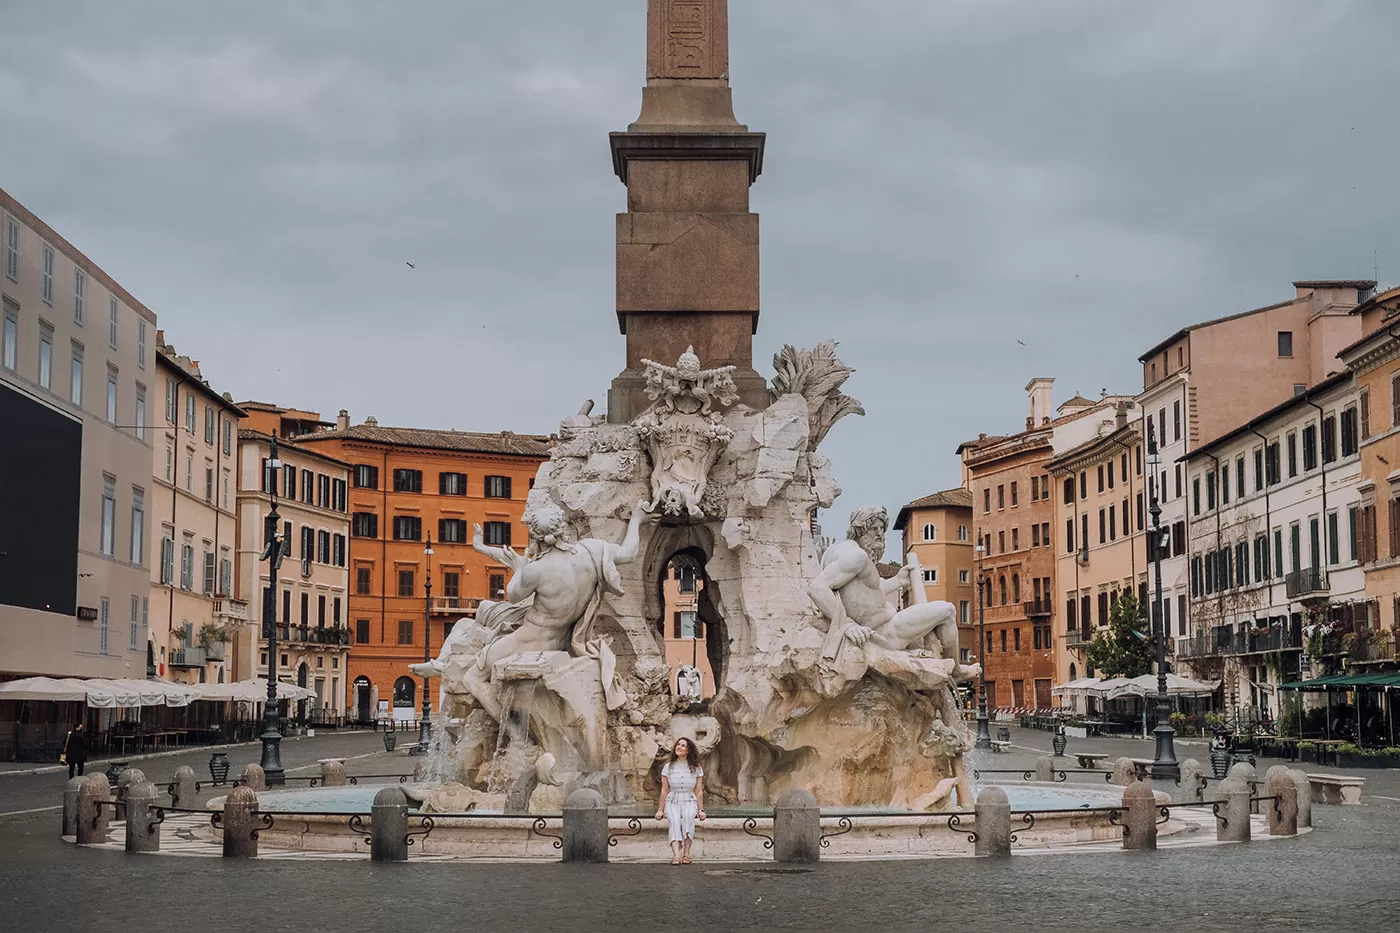 Unique things to do in Rome - See Piazza Navona